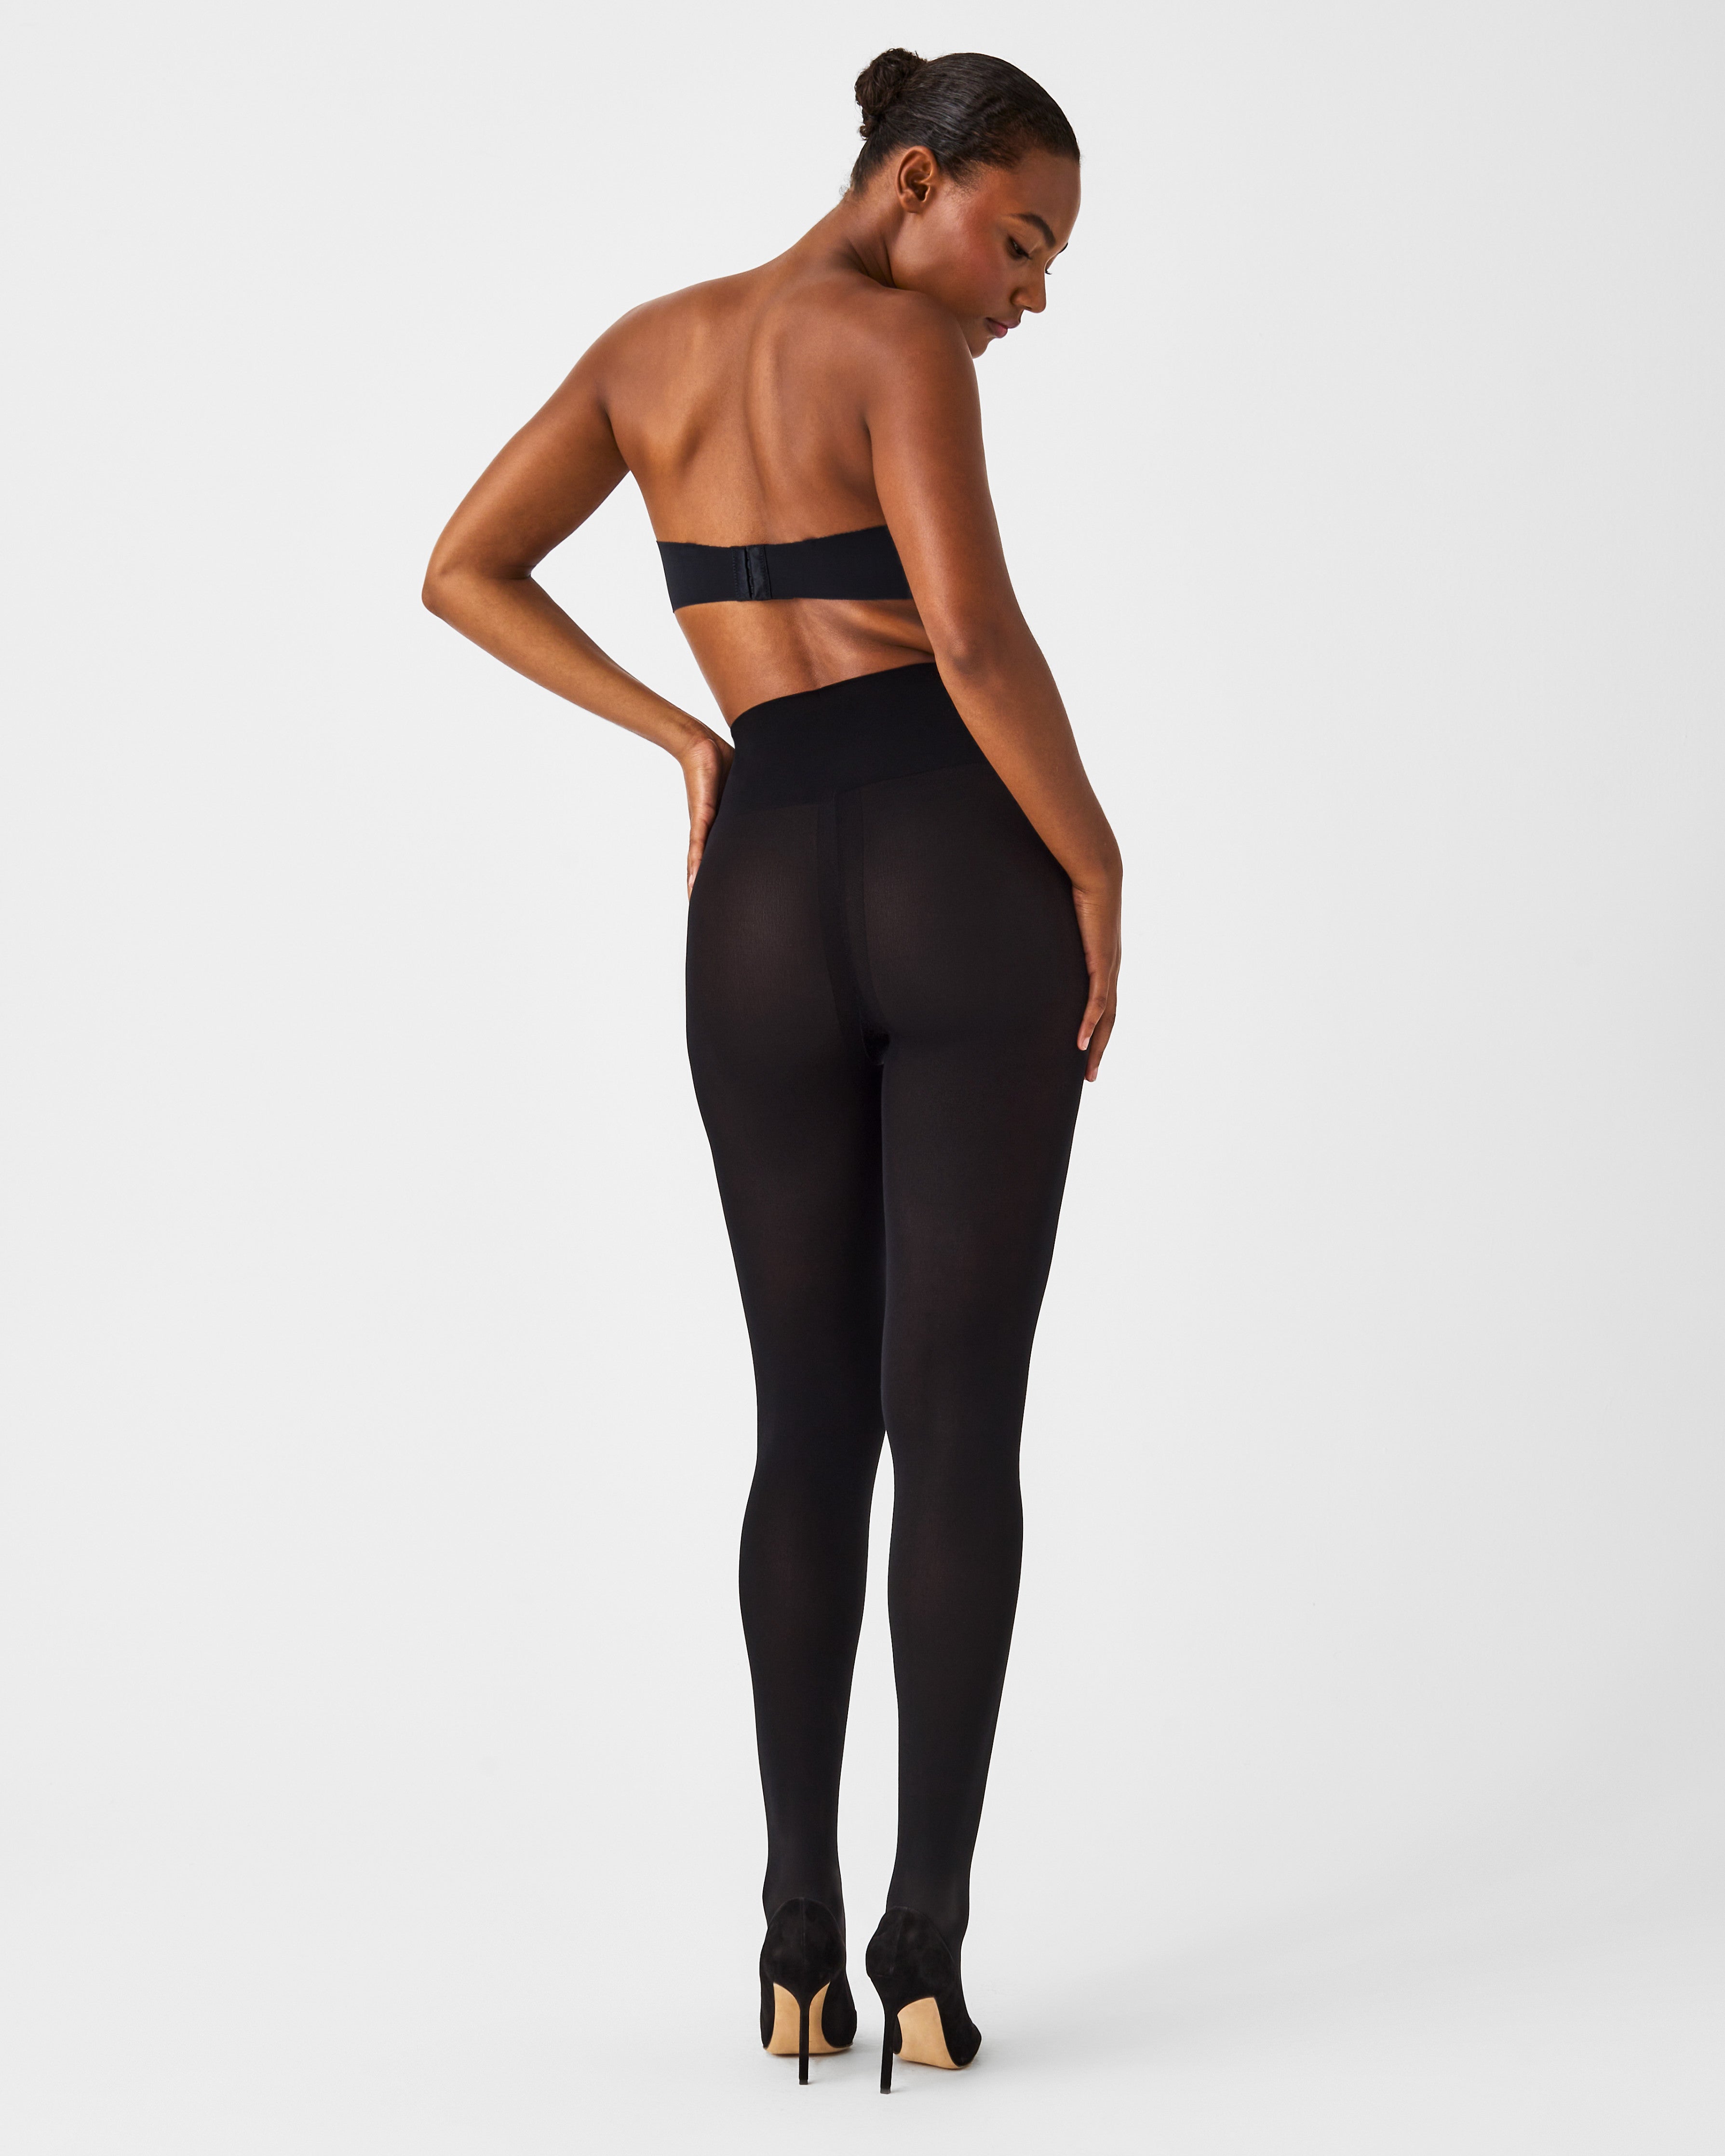 Assets Spanx Shaping Leggings 20339R Very Black - Women's Size Large